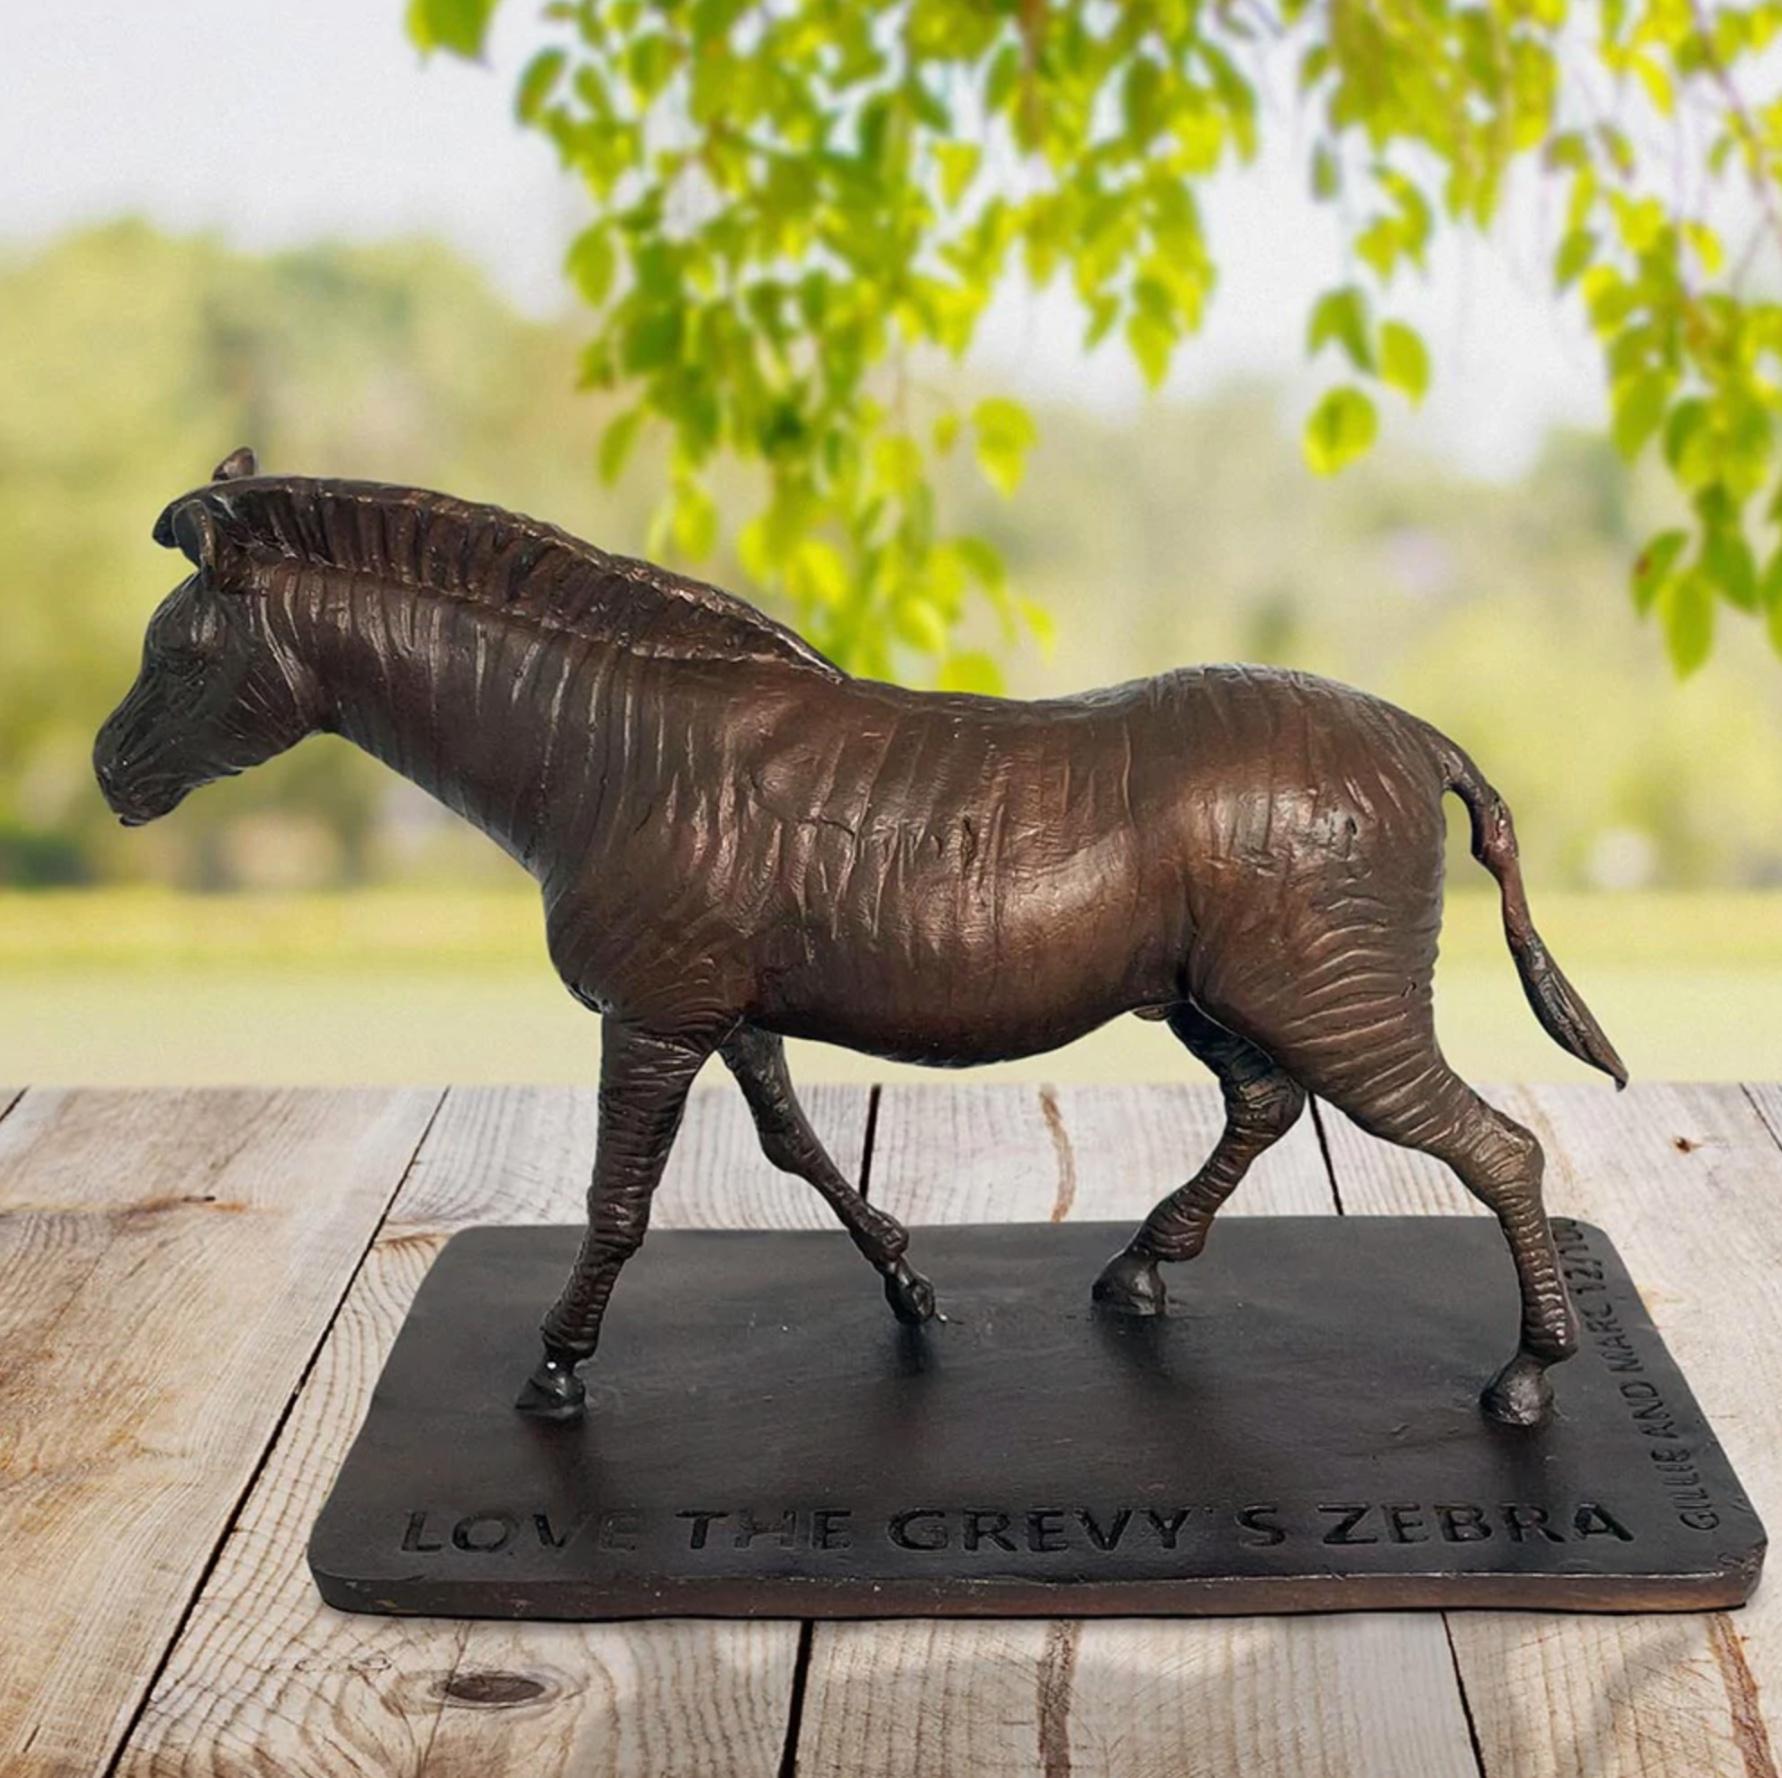 Title: Love the Grevy's Zebra
Authentic Bronze Sculpture

This authentic bronze sculpture titled 'Love the Grevy's Zebra' by artists Gillie and Marc has been meticulously crafted in bronze. It features the Grevy's Zebra marching and comes in a